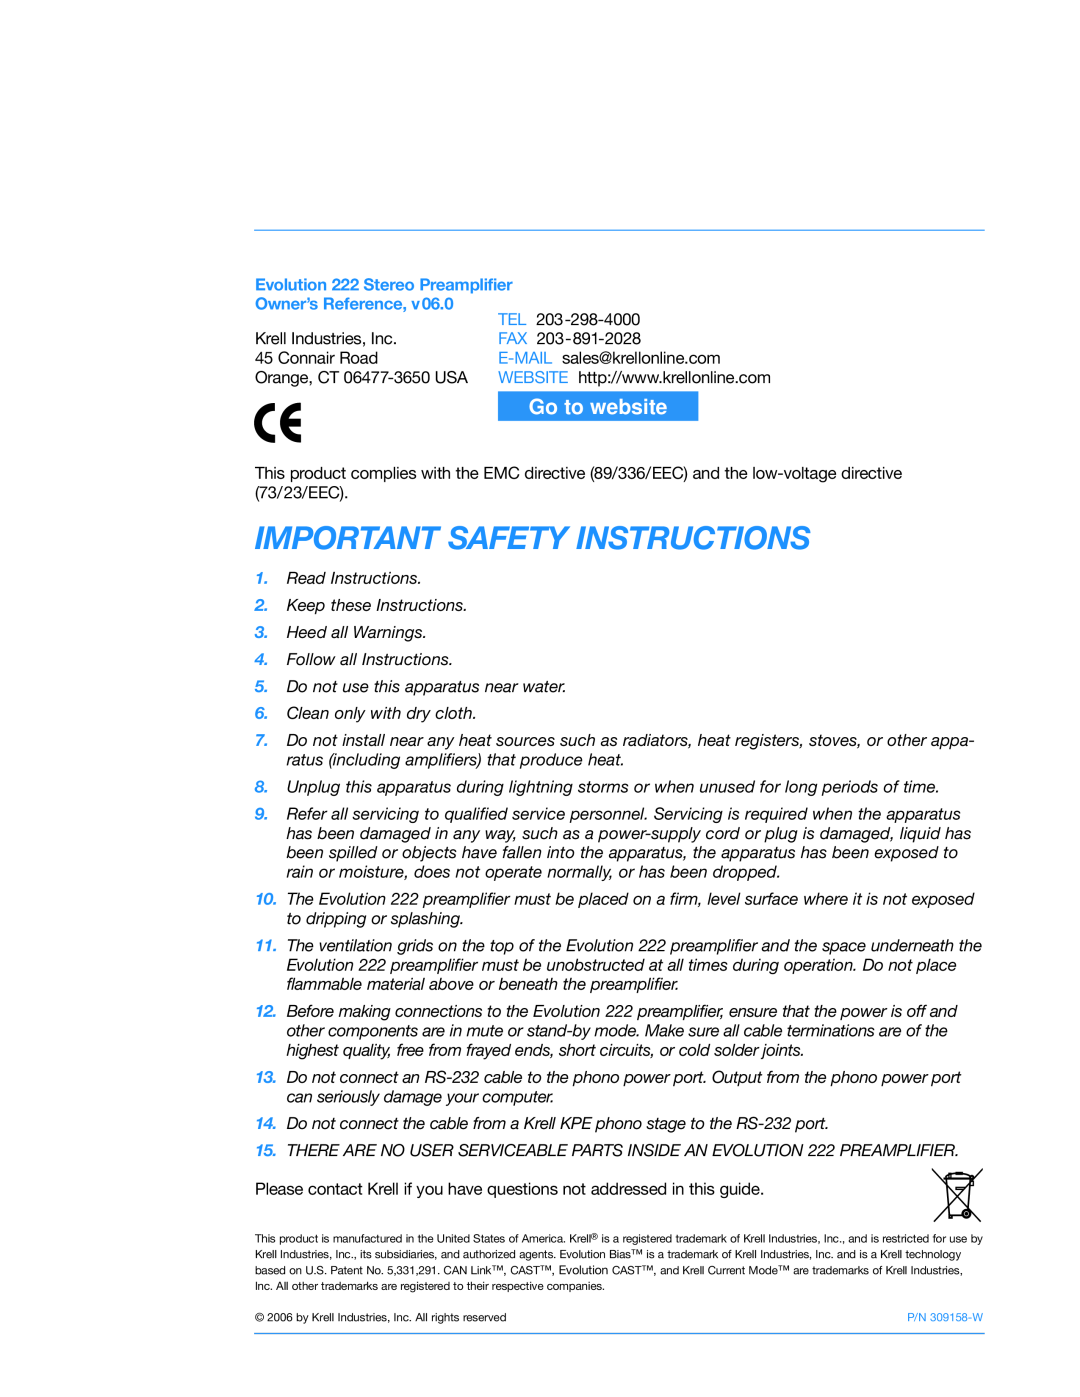 Krell Industries 222 manual Important Safety Instructions, Go to website 